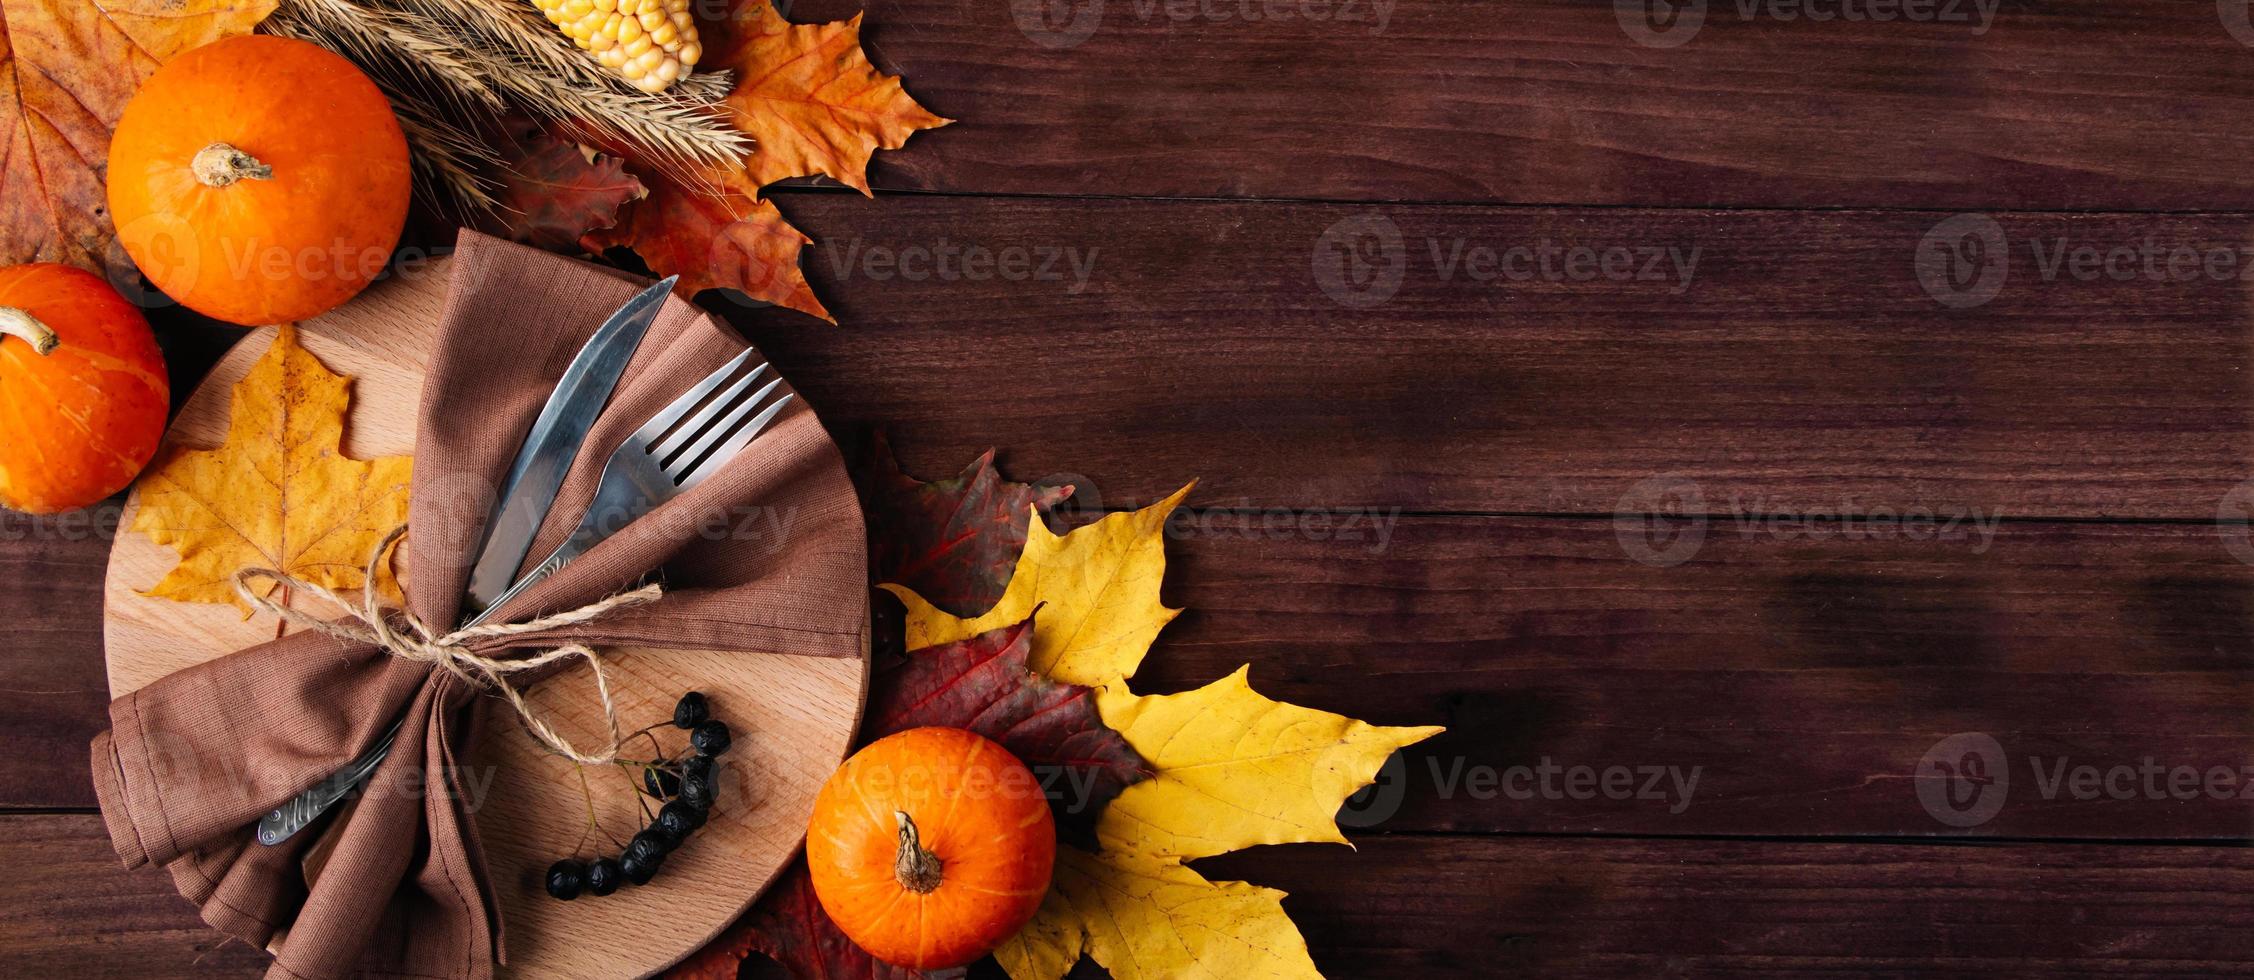 Thanksgiving cutlery setting. Festive table decor on wooden background. photo